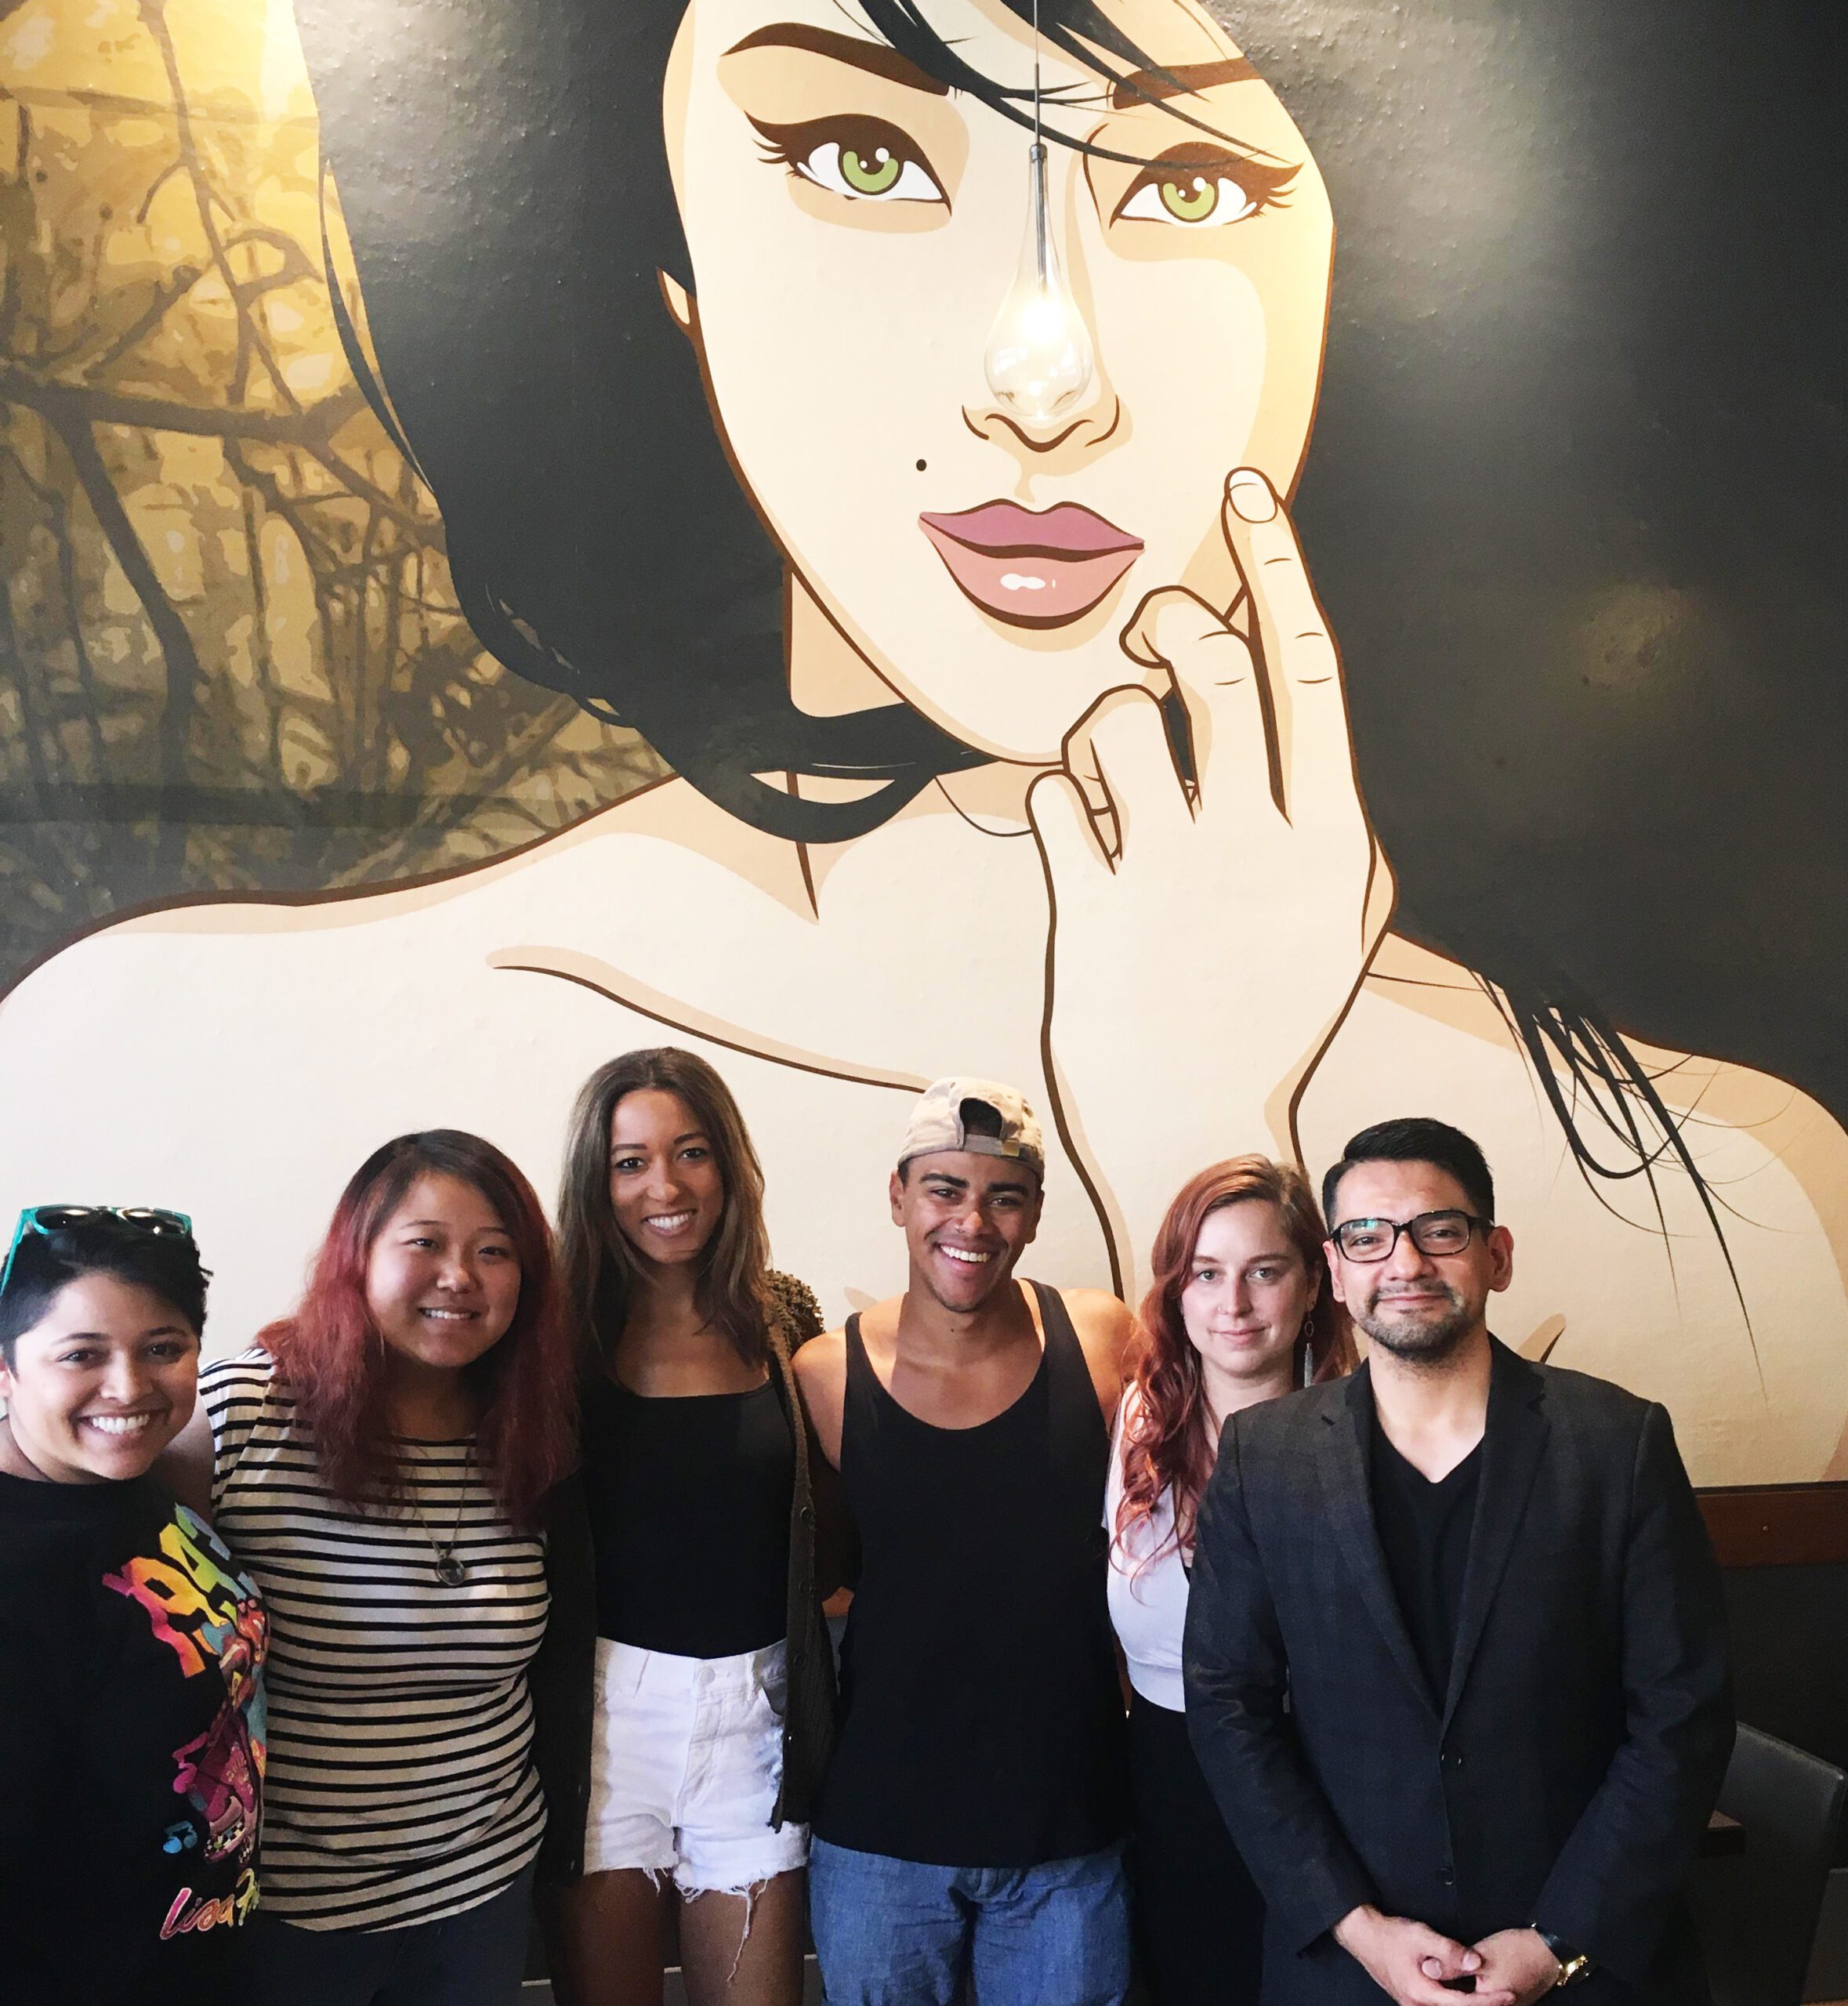 Students standing in front of mural inside restaurant